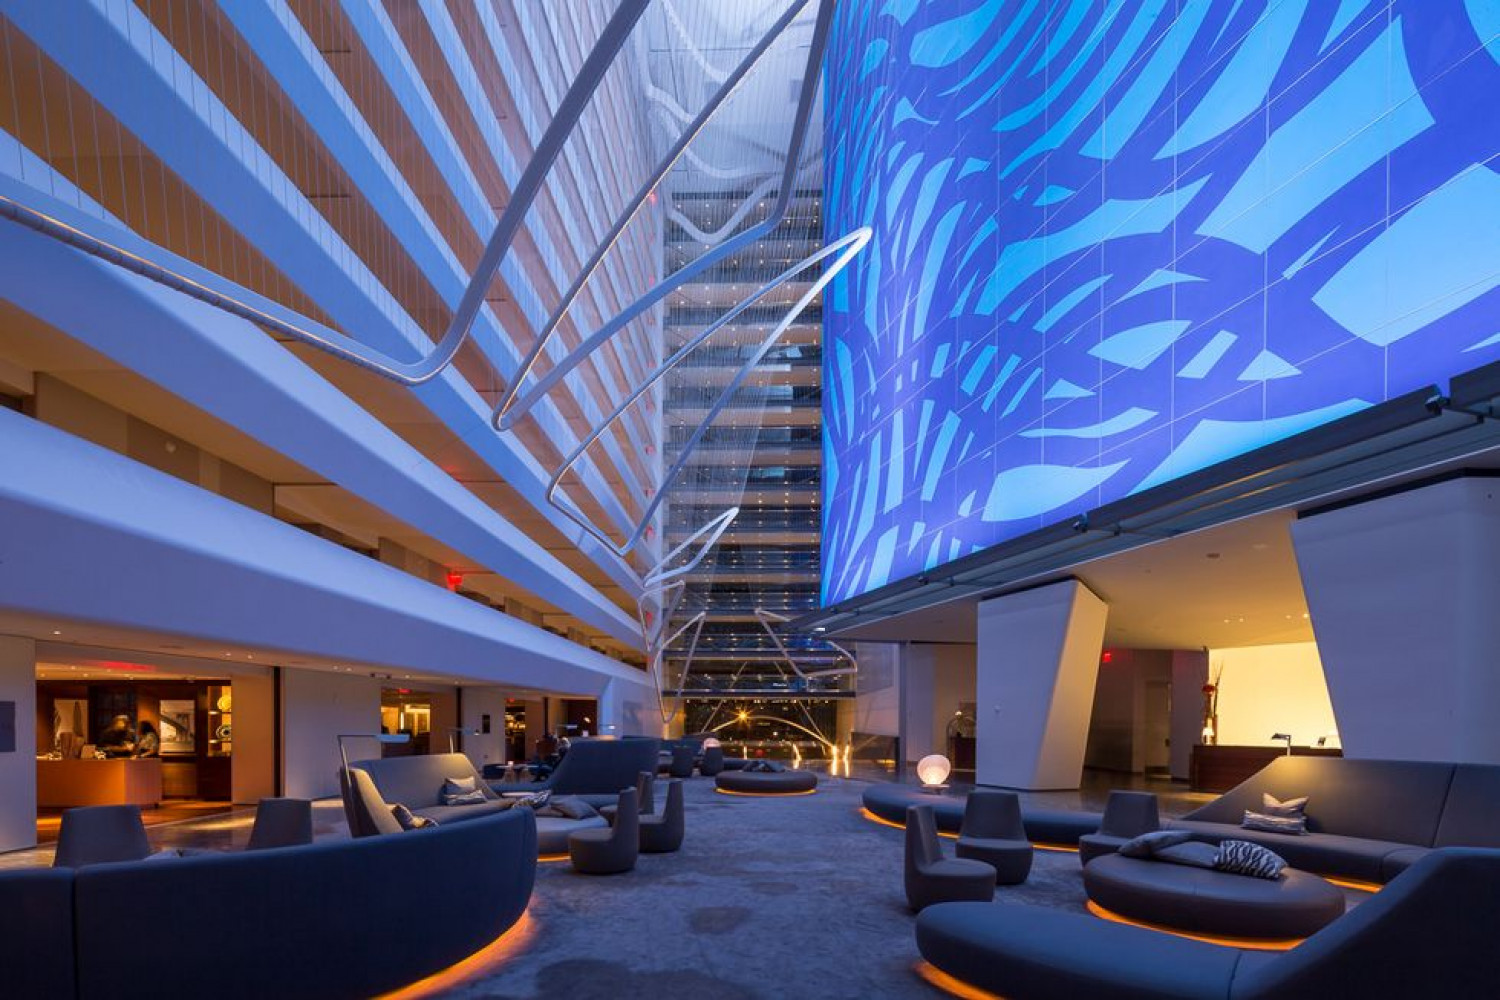 The Conrad in New York has a striking blue and purple Sol LeWitt painting, 'Loopy Doopy (Blue and Purple),' that rises 13 stories high